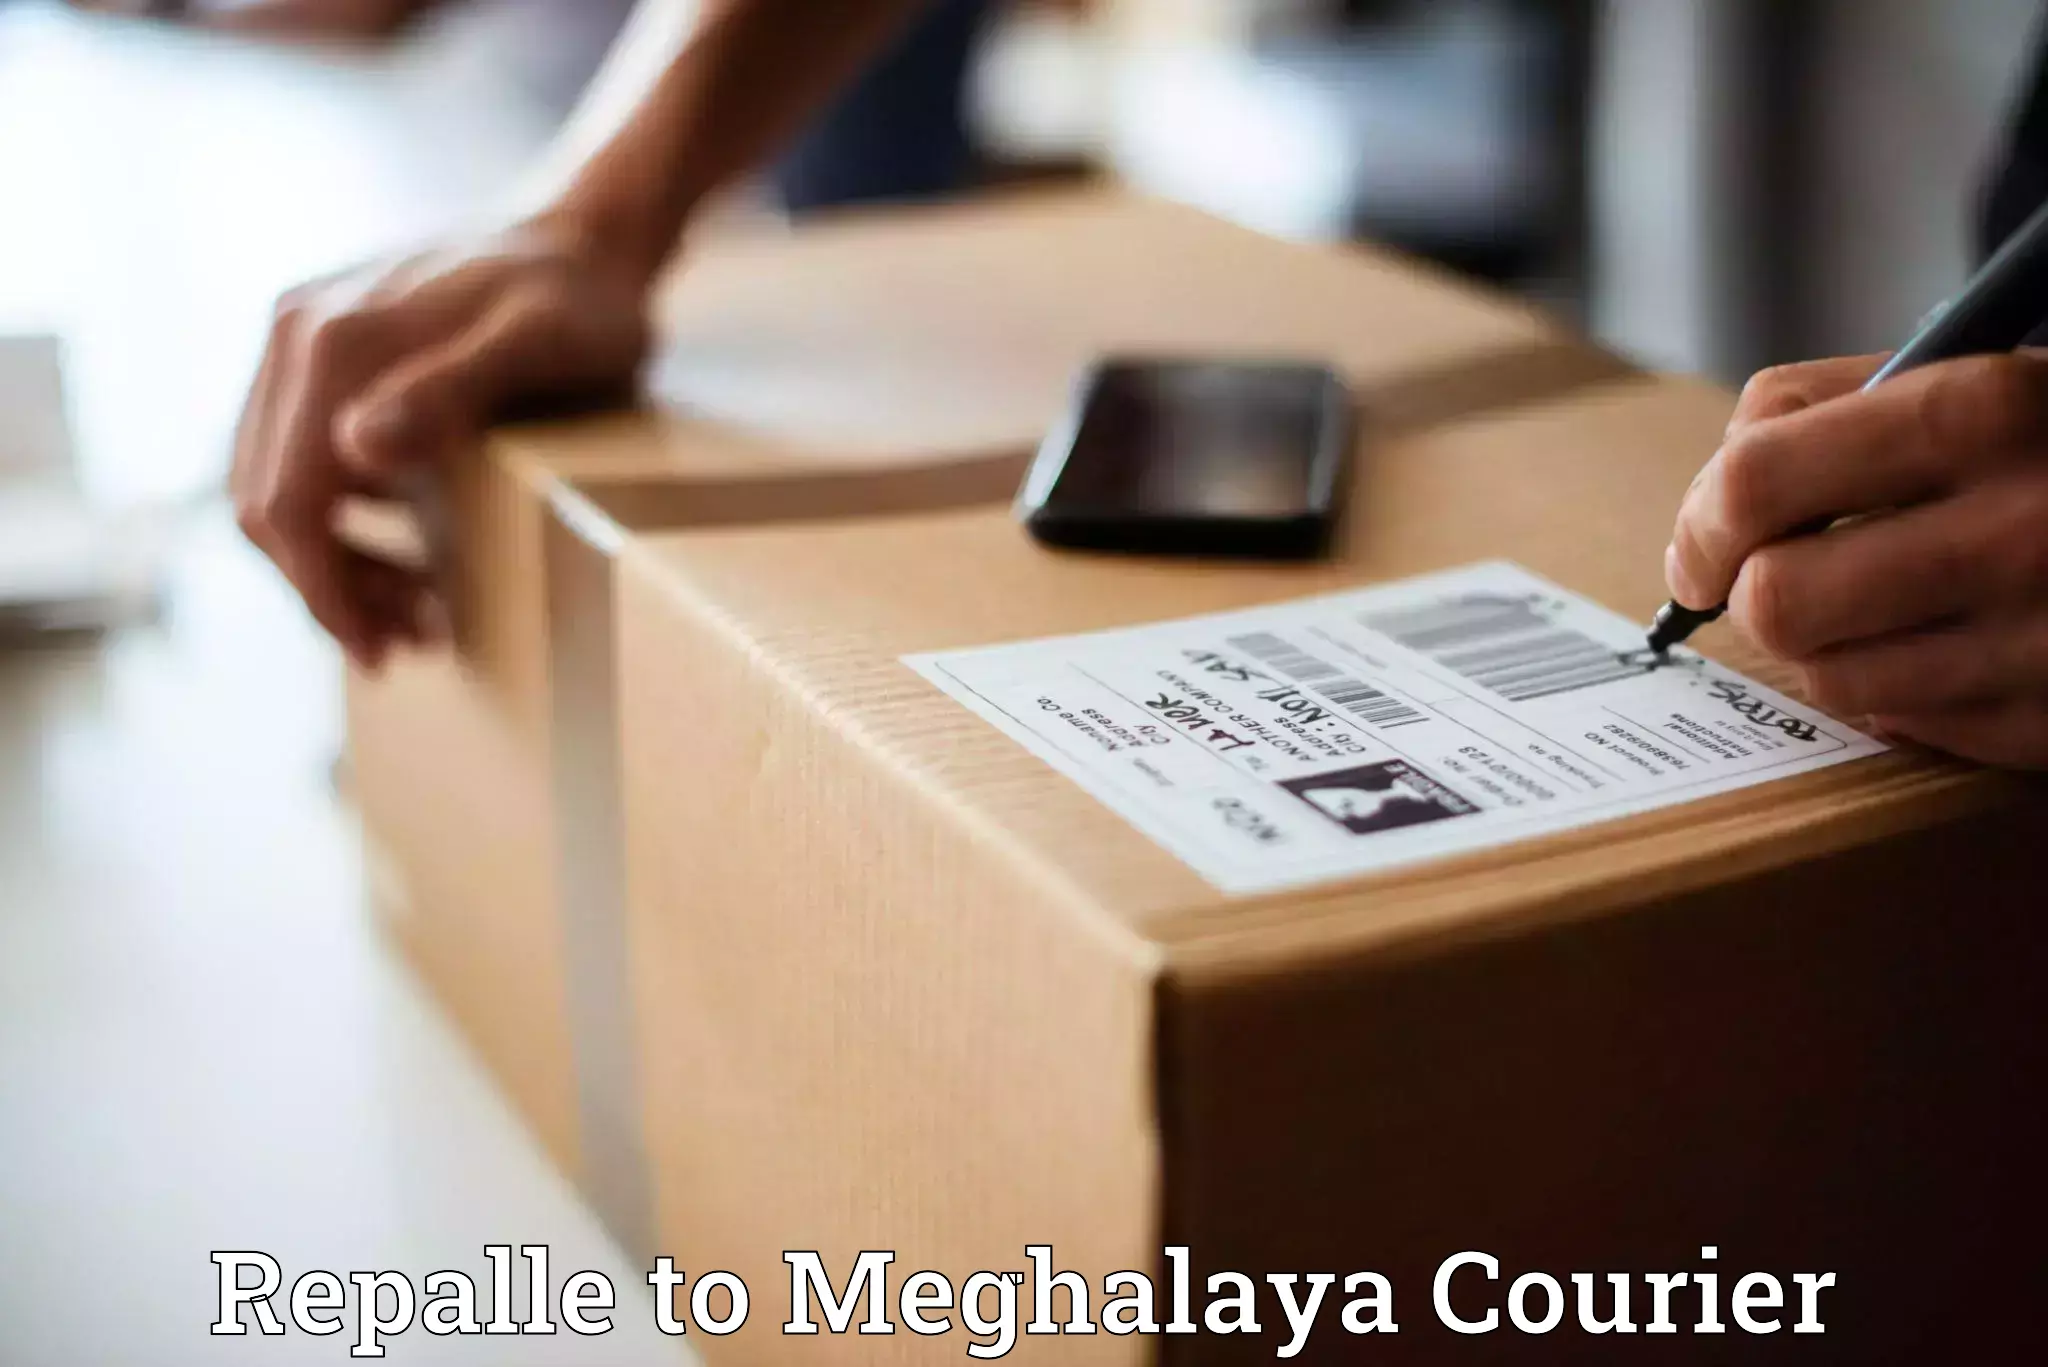 Innovative shipping solutions Repalle to Meghalaya